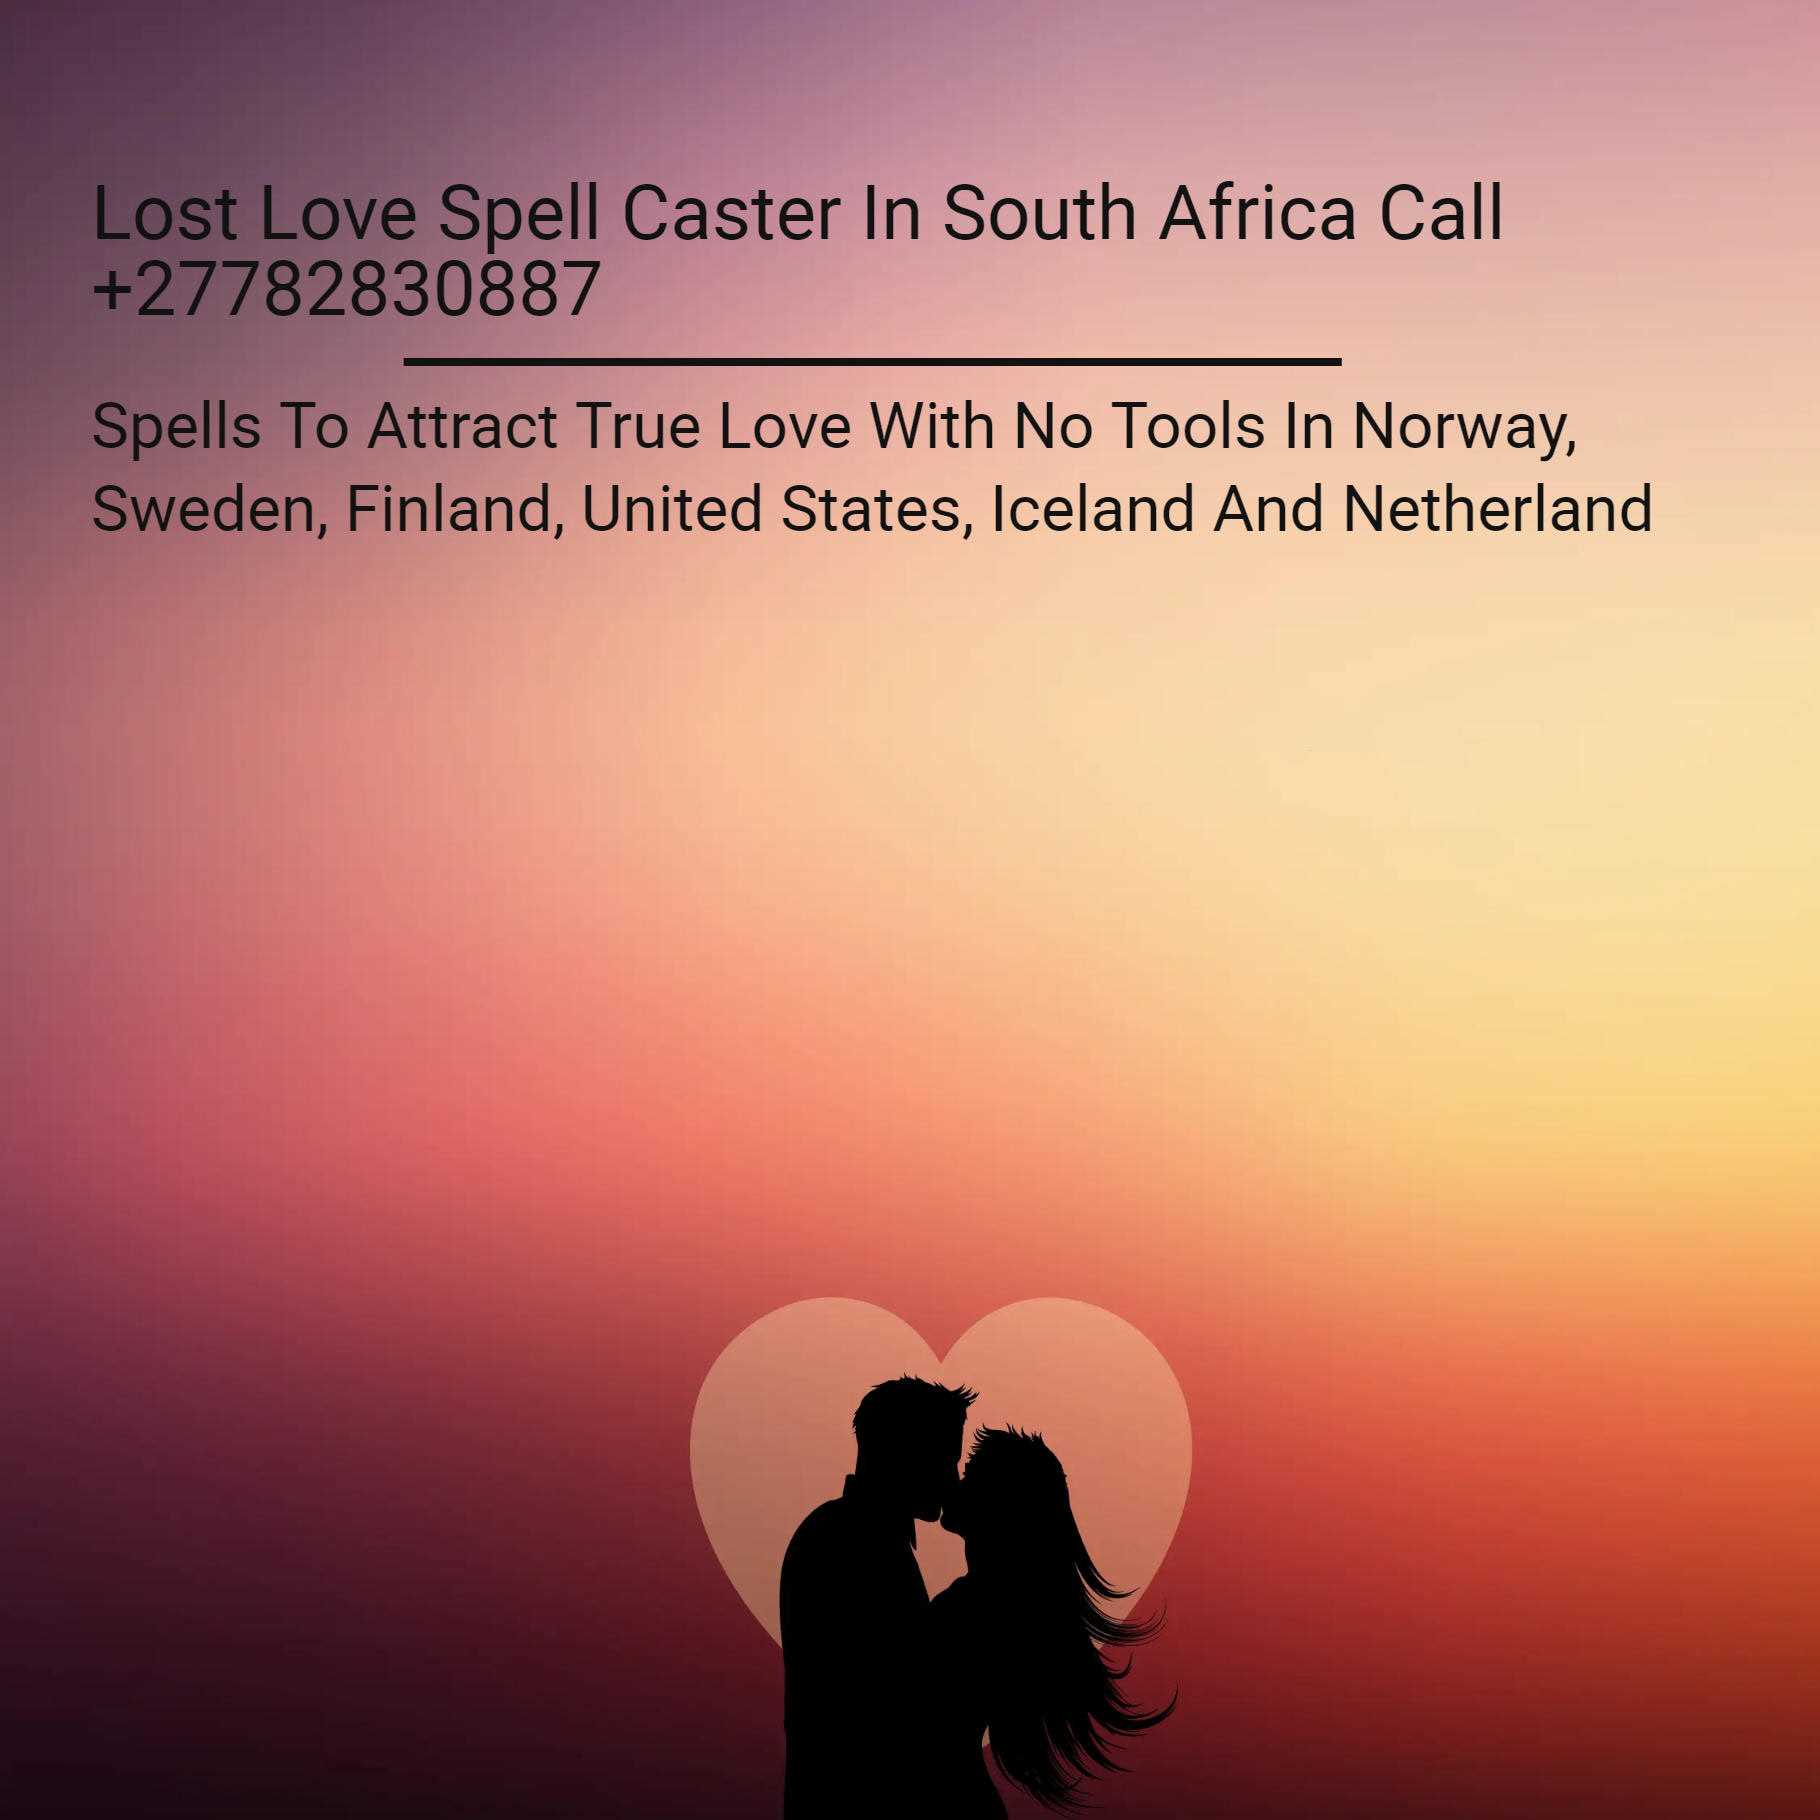 Love Spells To Bring Back Lost Lovers In Johannesburg South Africa And Verkhn'odniprovs'k City in Ukraine Call ☏ +27782830887 Attract True Love With No Tools In Norway, Sweden, Finland, United States, Iceland And Switzerland,   Love Spells In Amsterdam Capital Of The Netherlands And Mount Pearl  City In Newfoundland, Canada🌹✍️(♥【( +27782830887 】♥)🌹✍️✍️ LOST LOVE SPELL CASTER IN Brussels Capital Of Belgium, WIN COURT CASES IN Cork City In The Republic Of Ireland, MARRIAGE AND DIVORCE SPELL IN Belfast Capital Of Northern Ireland ❤️ LOVE SPELLS IN Cardiff Capital Of Wales, United Kingdom 兀꧅❤️❤️)) RETURN MY EX~LOVE SPELL IN PIETERMARITZBURG SOUTH AFRICA